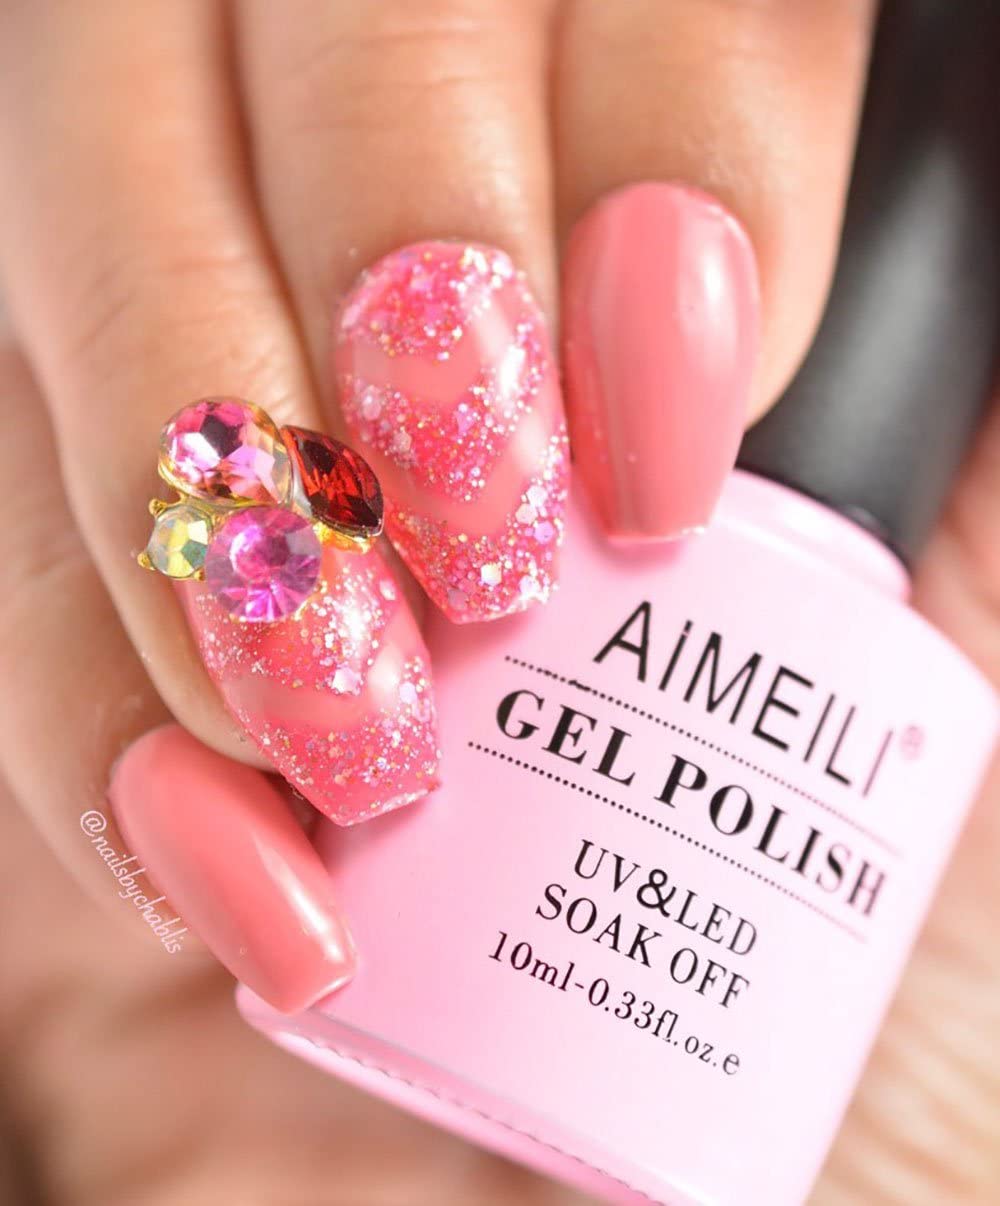 barbie pink nails with glitter